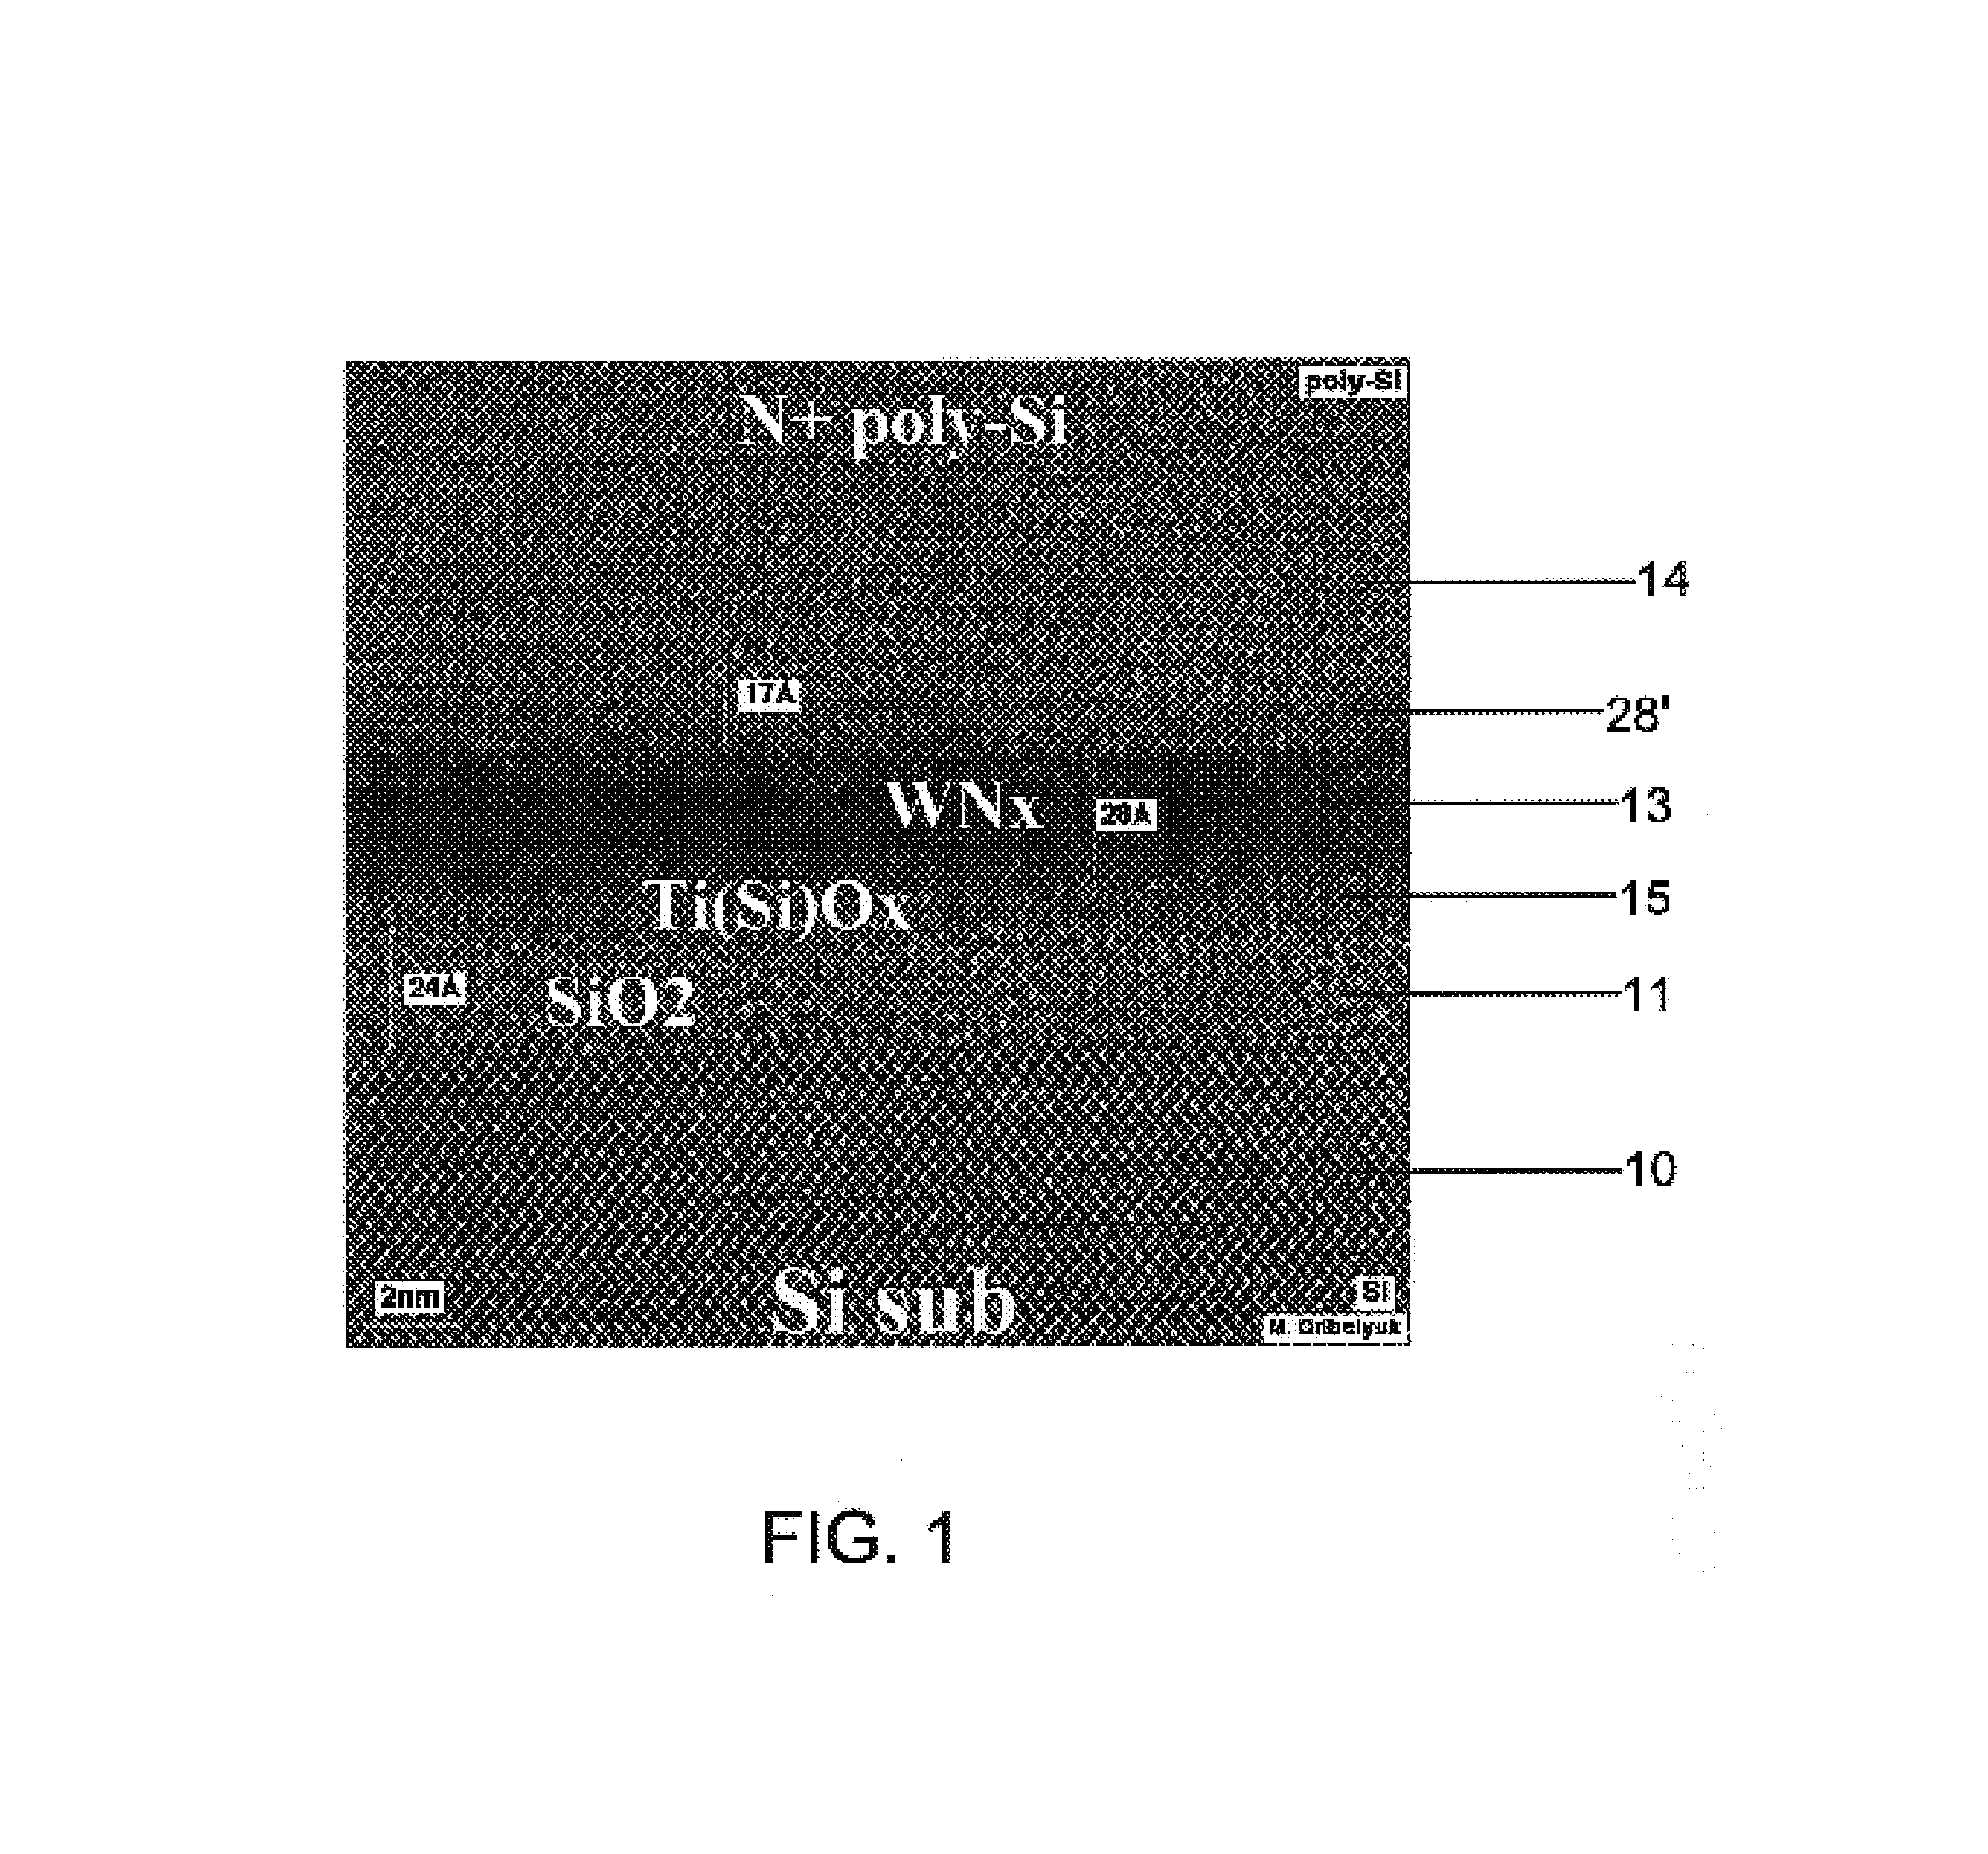 High-temperature stable gate structure with metallic electrode